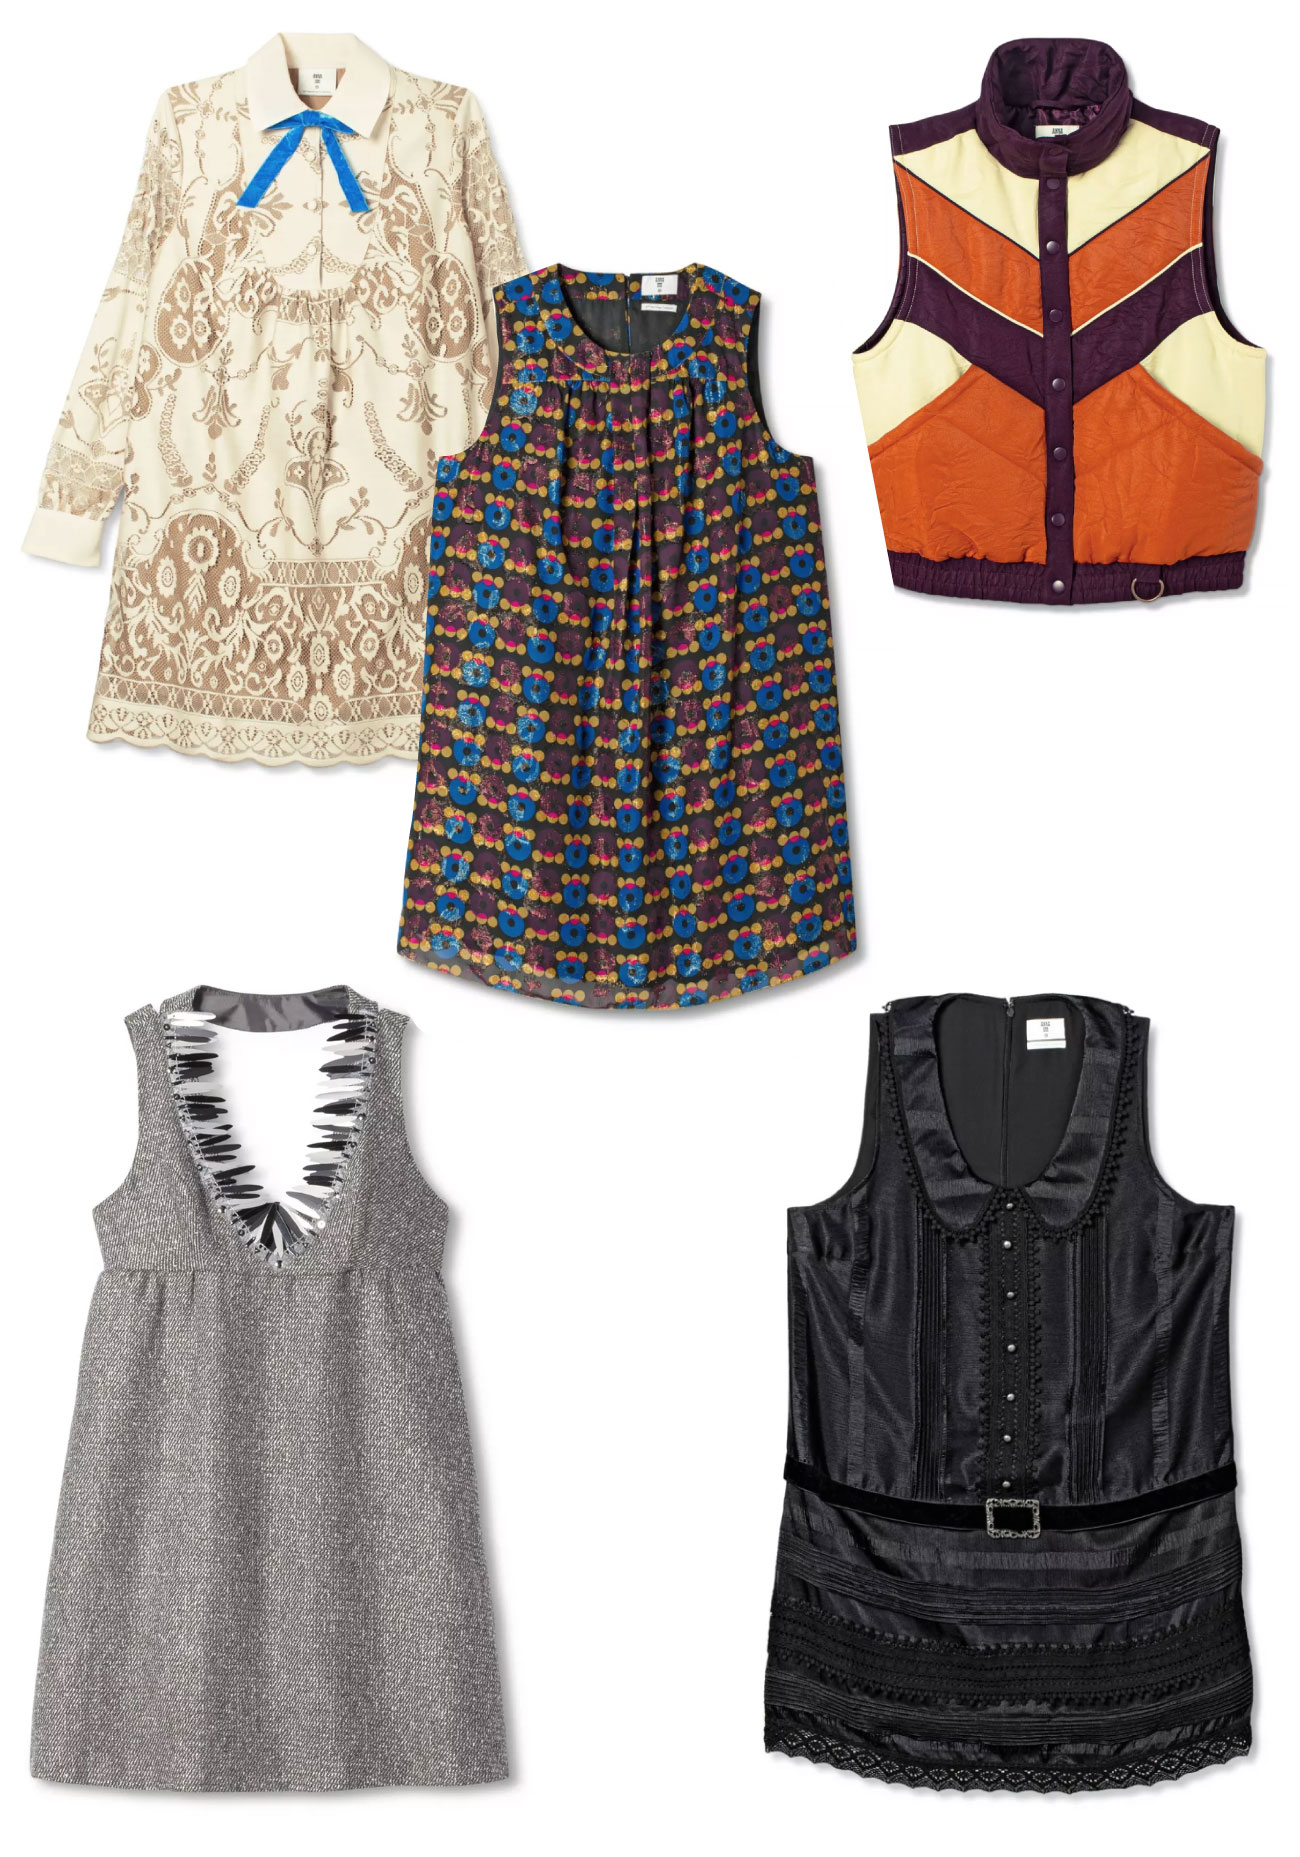 Five pieces of apparel from Anna Sui including tops, dresses and vests